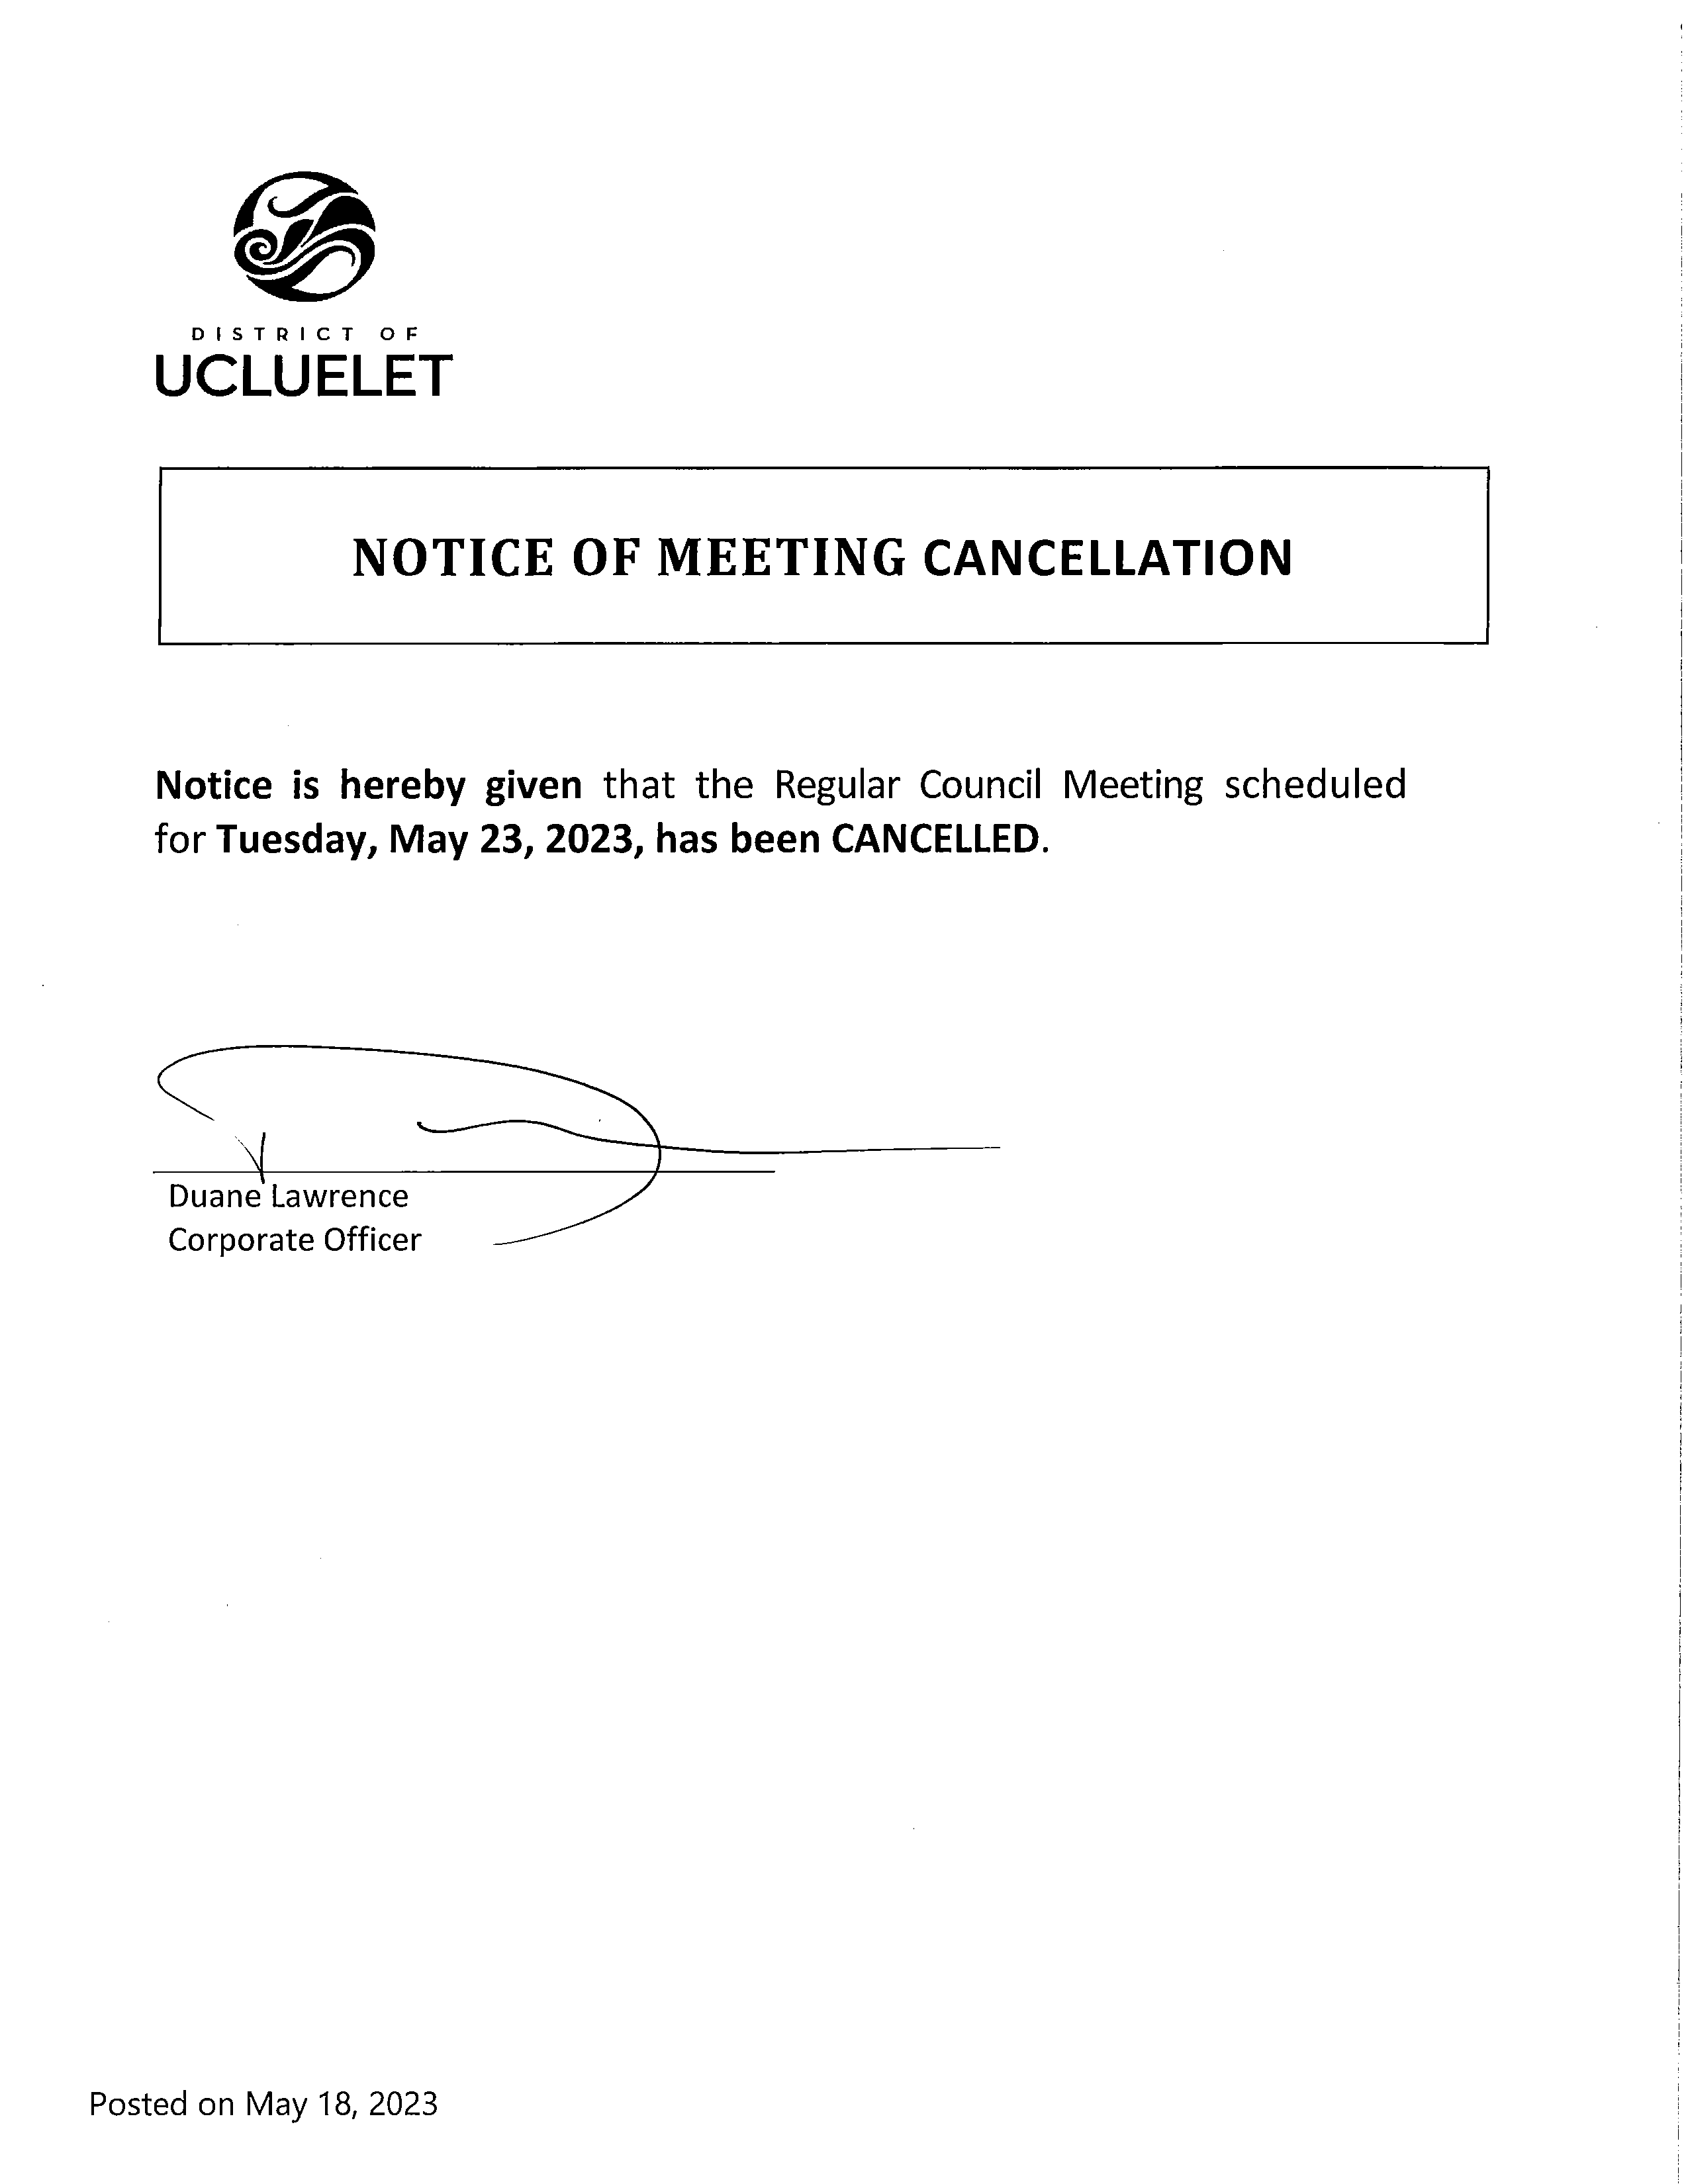 2023-05-23_Regular_Council_Meeting_Cancelled.png